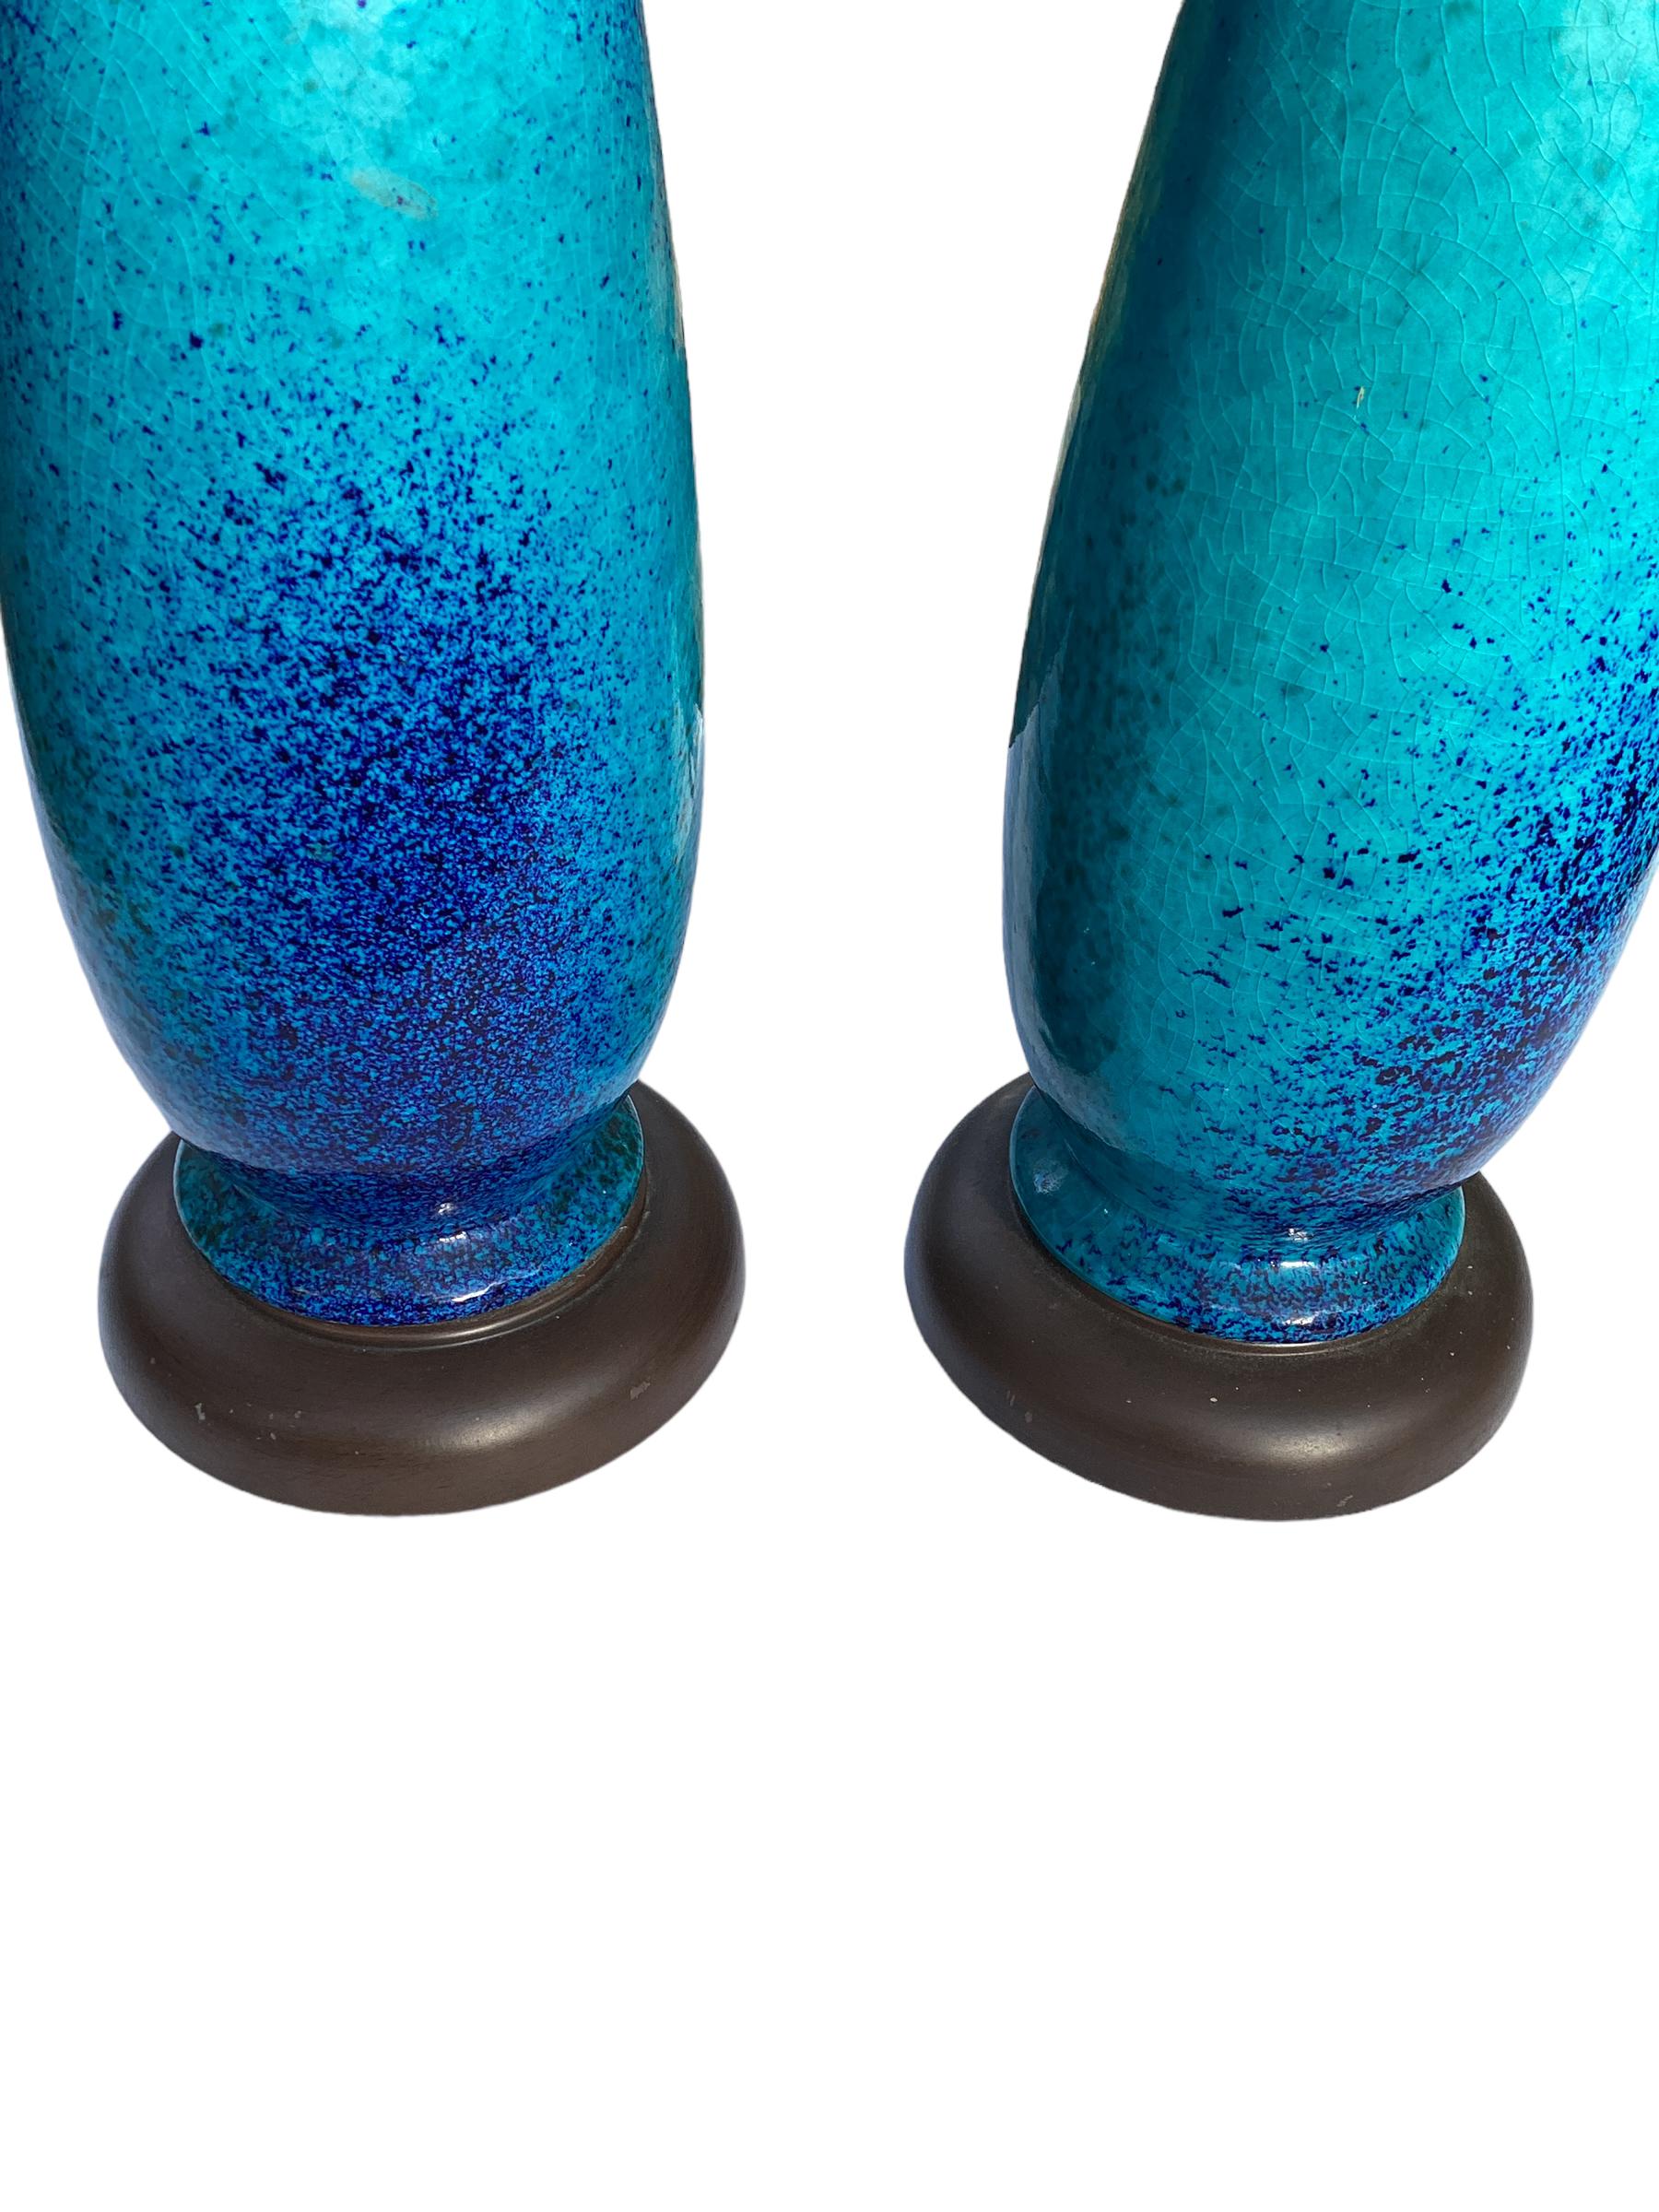 Pair of American mid century classically tailored light blue base color and  dark blue speckled crackle glaze porcelain lamps. New sockets and wiring to USA standards. Lamps measure 22